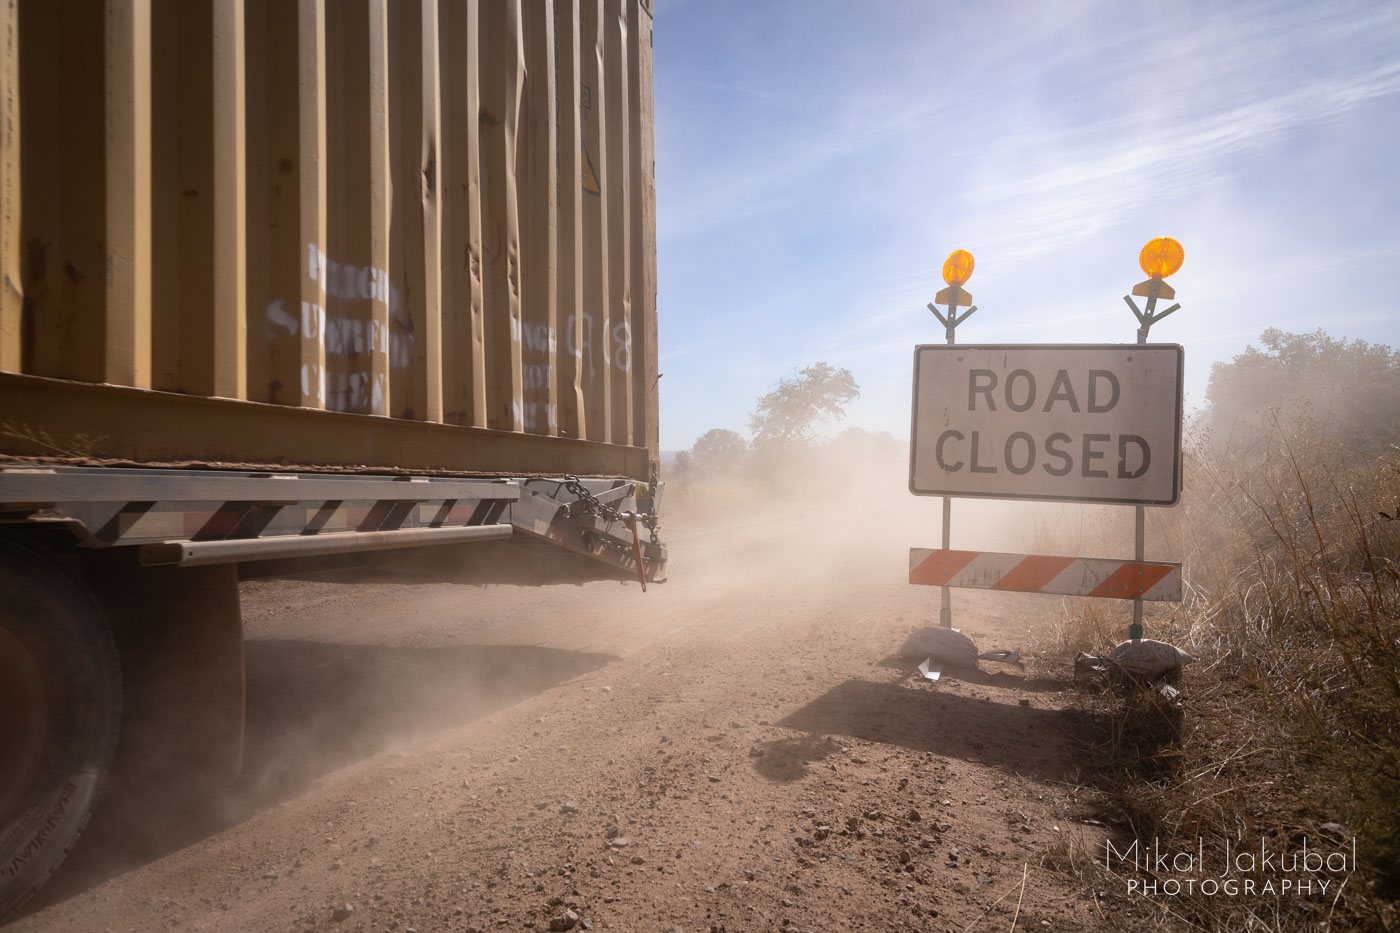 A dusty roadside scene. A "road closed" sign faces the camera while the last end of a shipping container on a trailer leaves the scene to the left, its wheels kicking up dust clouds.